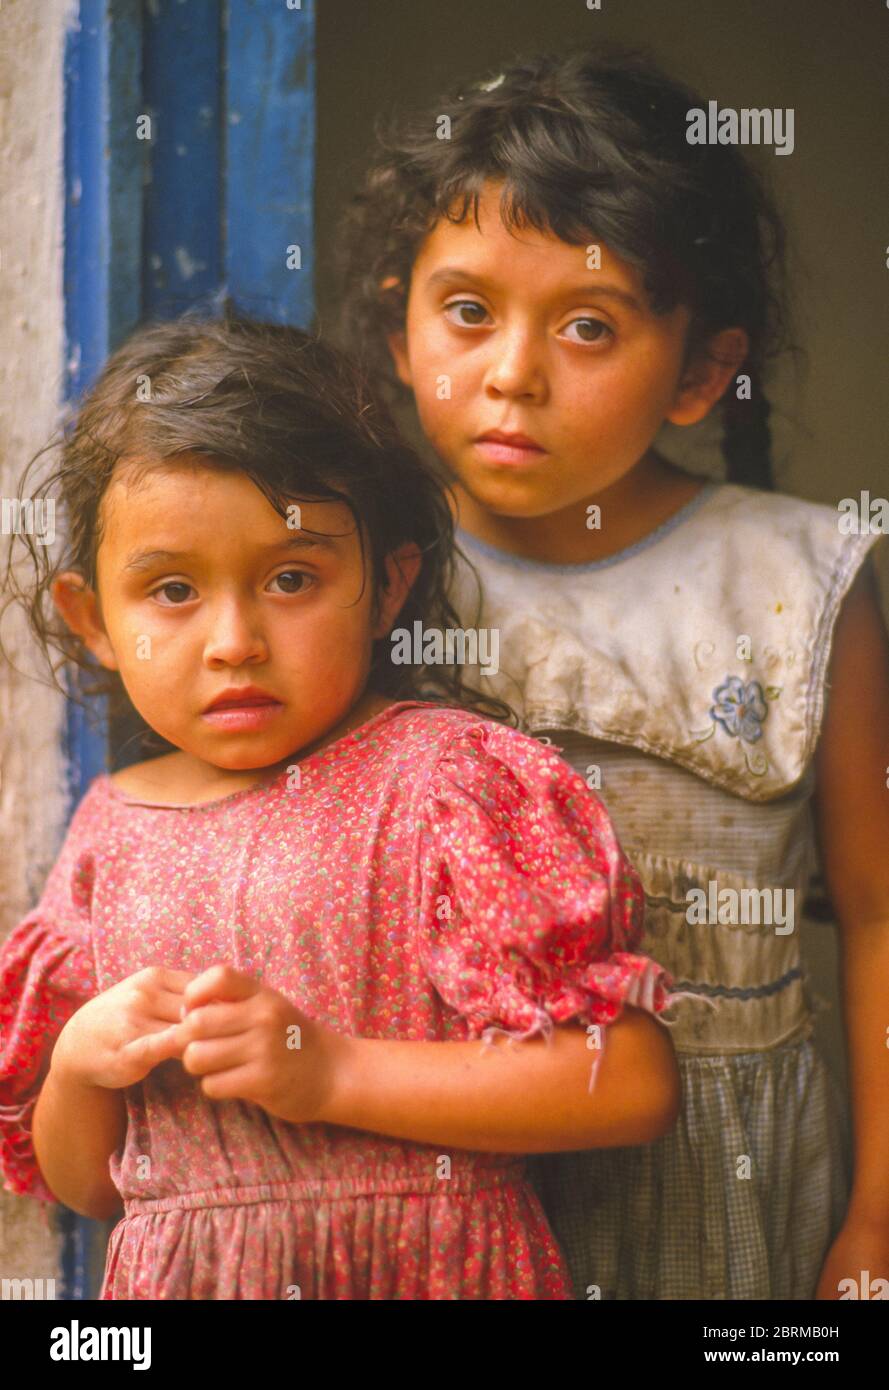 SANTA ANA, TACHIRA STATE, VENEZUELA - Two young girls, children of Colombian workers living in Santa Ana in May 1988. Stock Photo